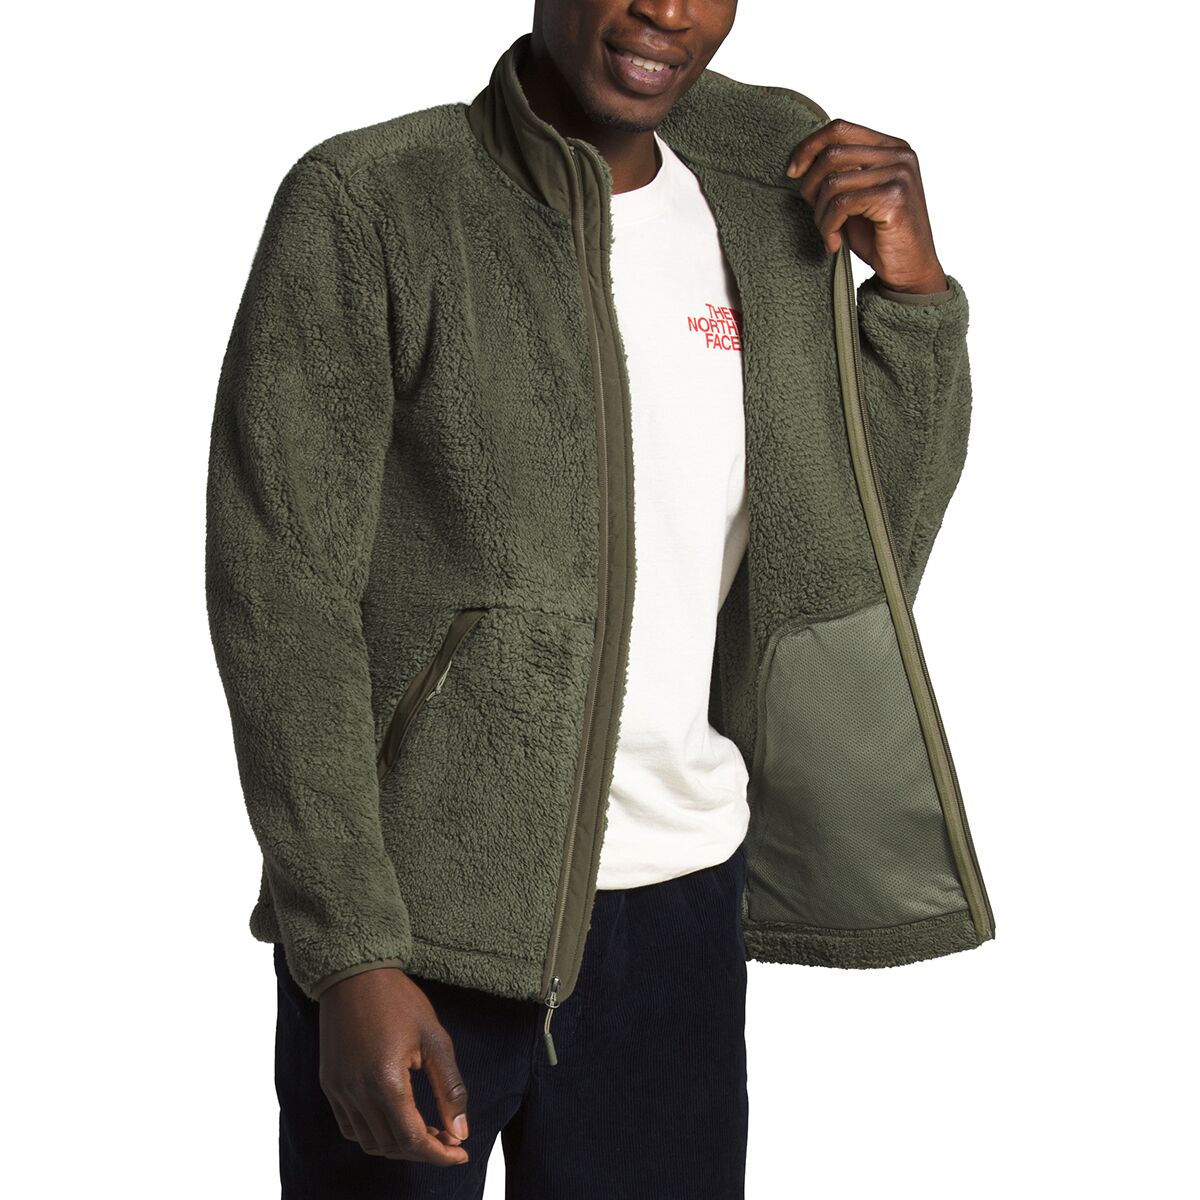 The North Face Campshire Full-Zip Fleece Jacket - Men's - Clothing